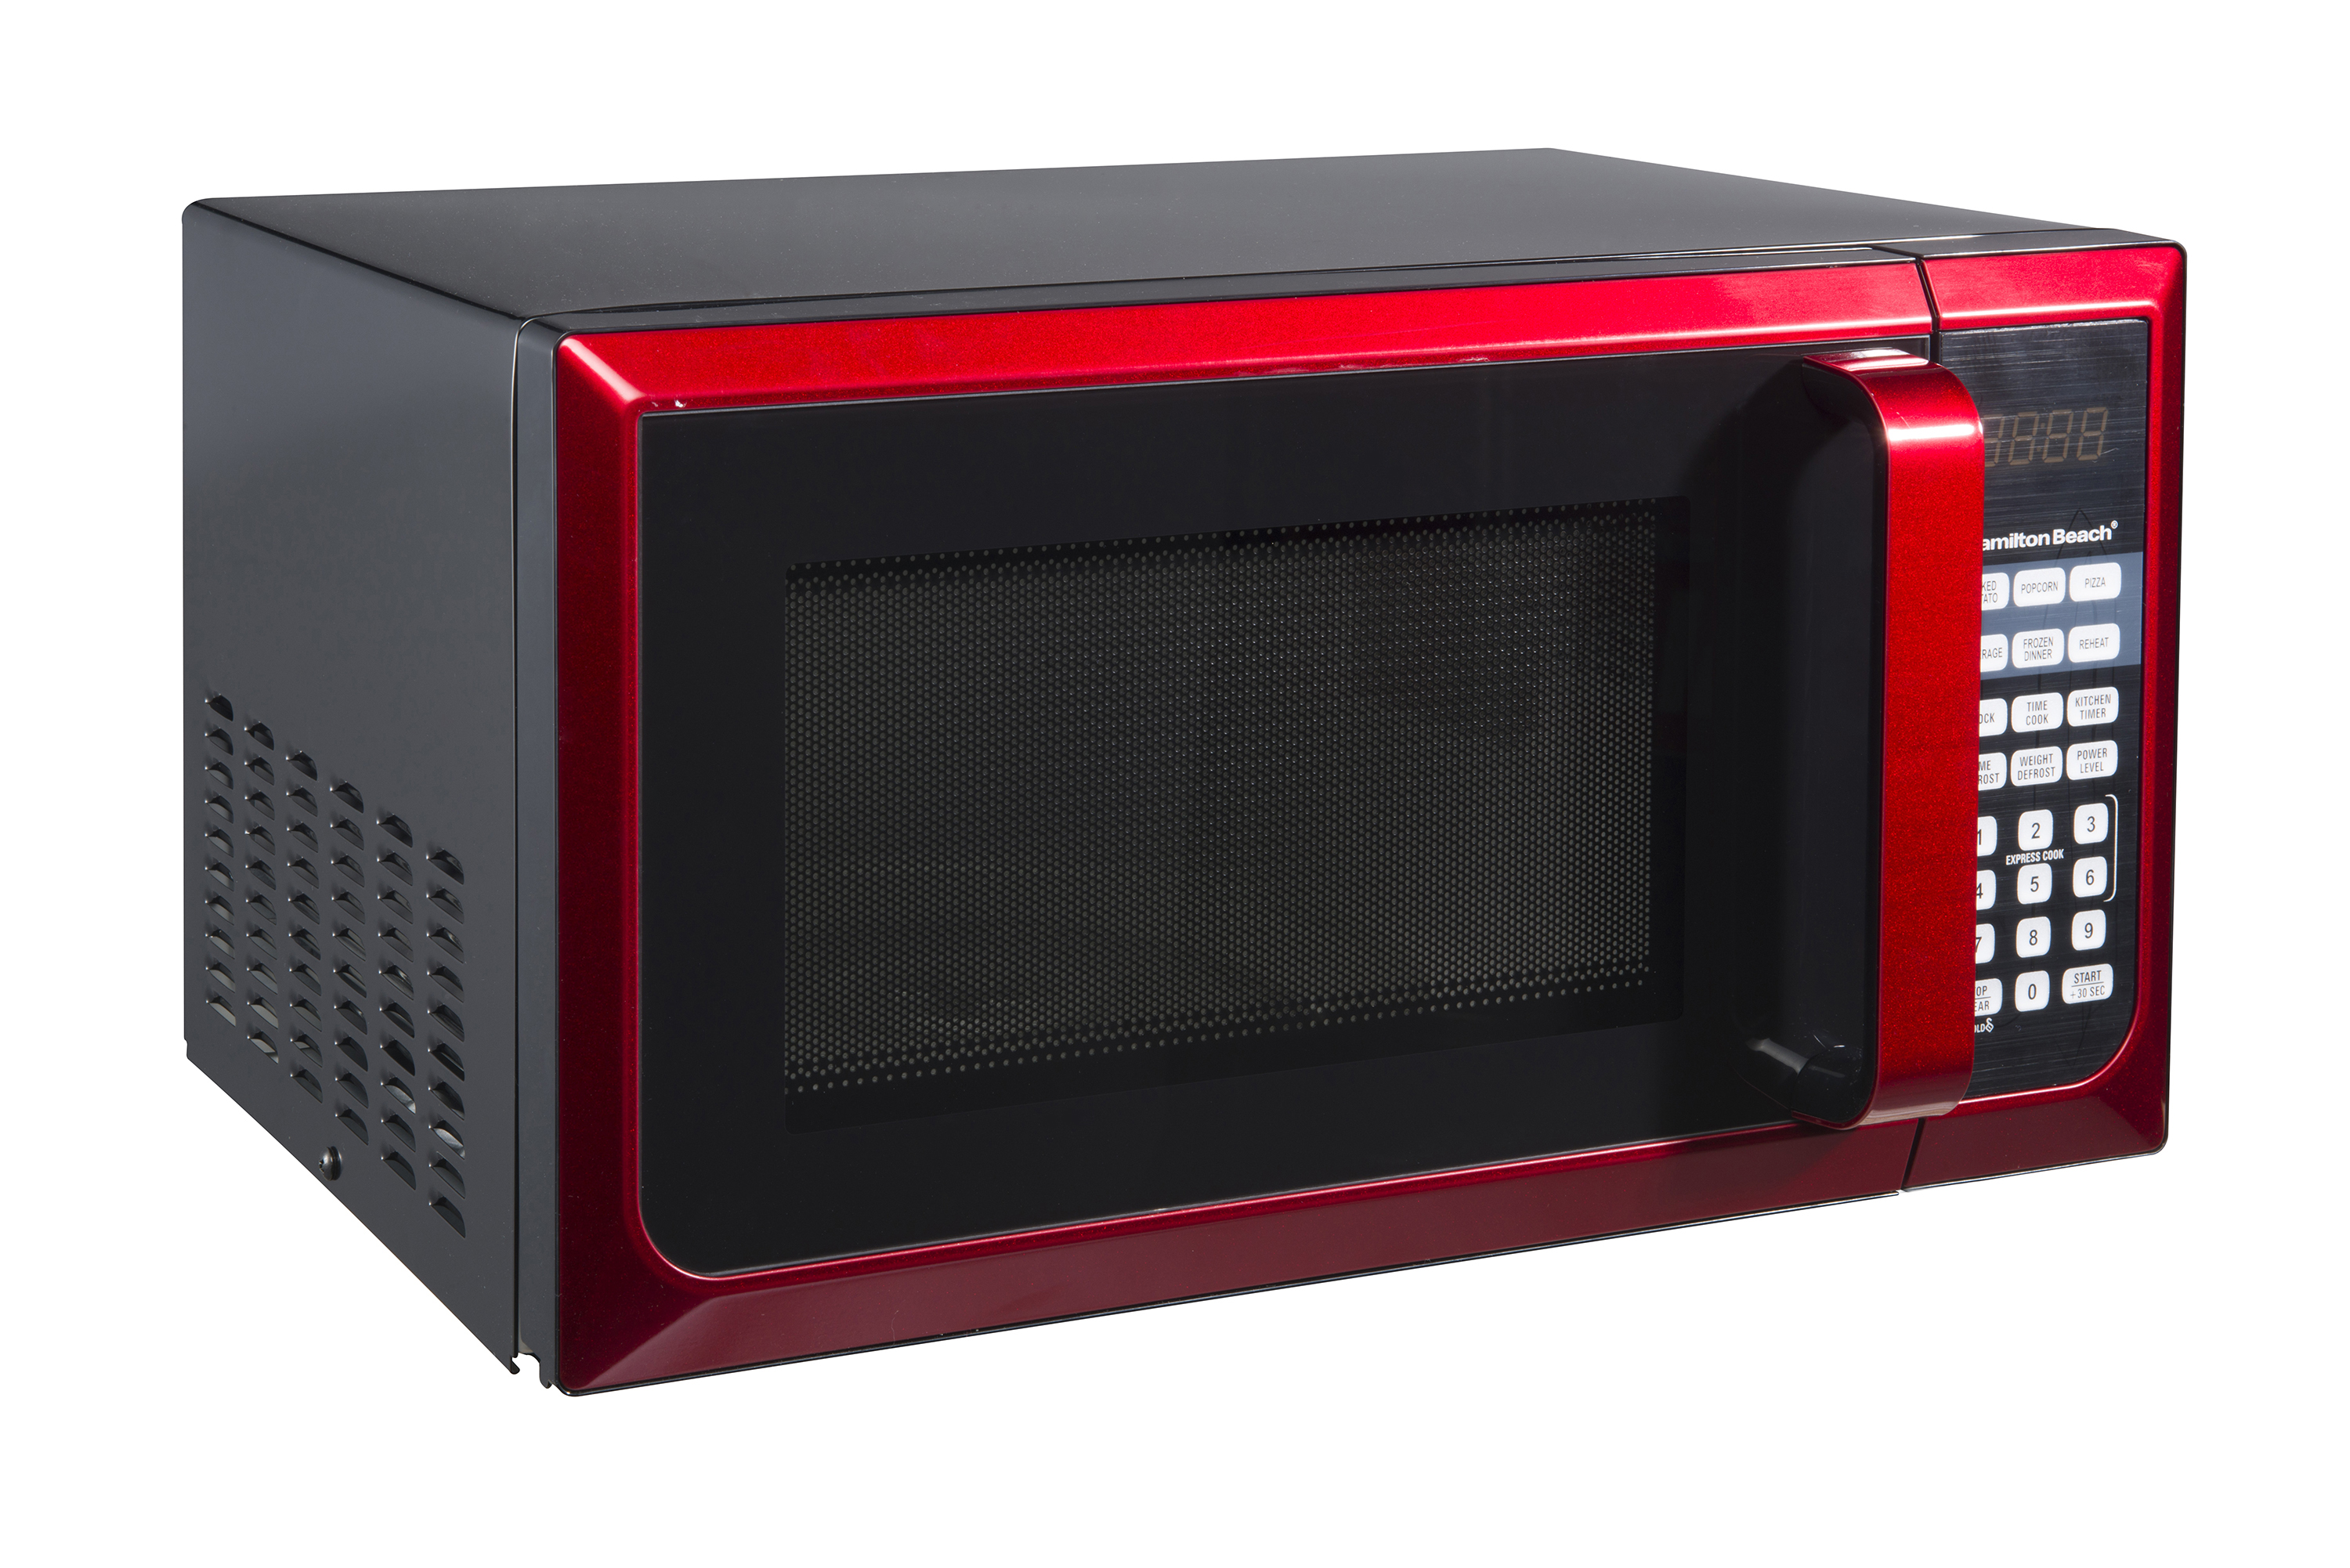 Hamilton Beach 0.9 cu. ft. Countertop Microwave Oven, 900 Watts, Red Stainless Steel - image 5 of 7